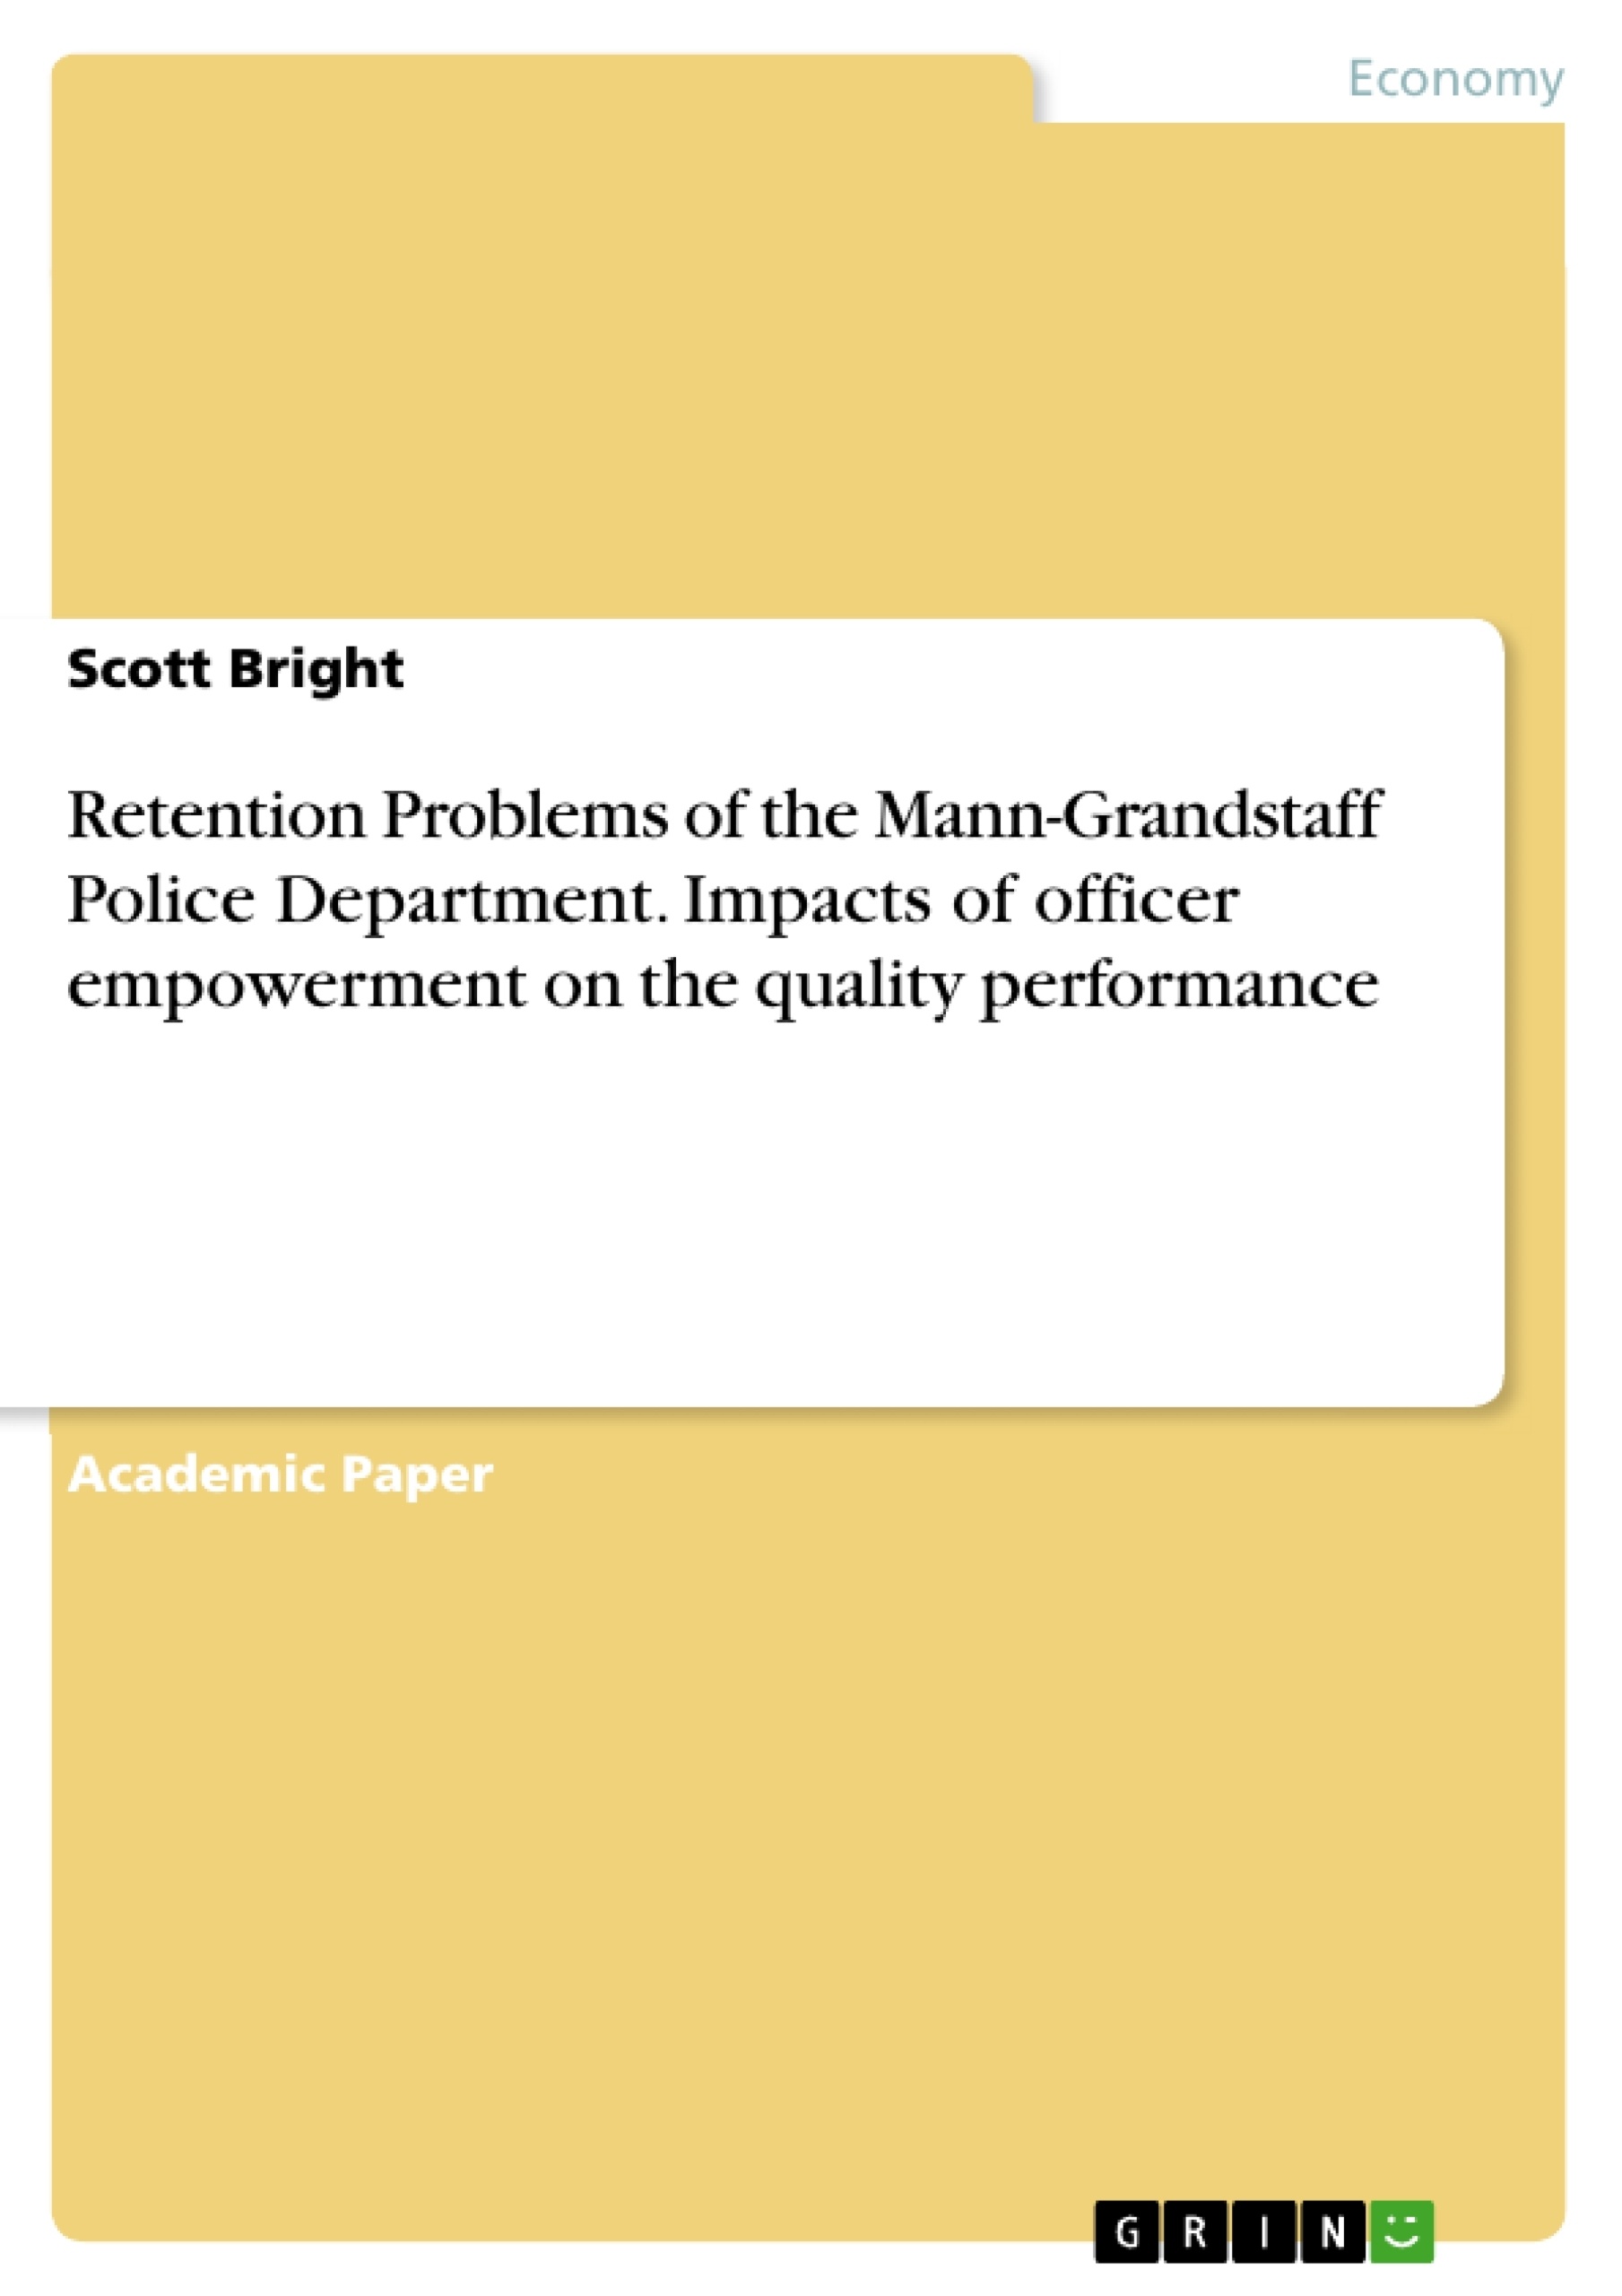 Titre: Retention Problems of the Mann-Grandstaff Police Department. Impacts of officer empowerment on the quality performance